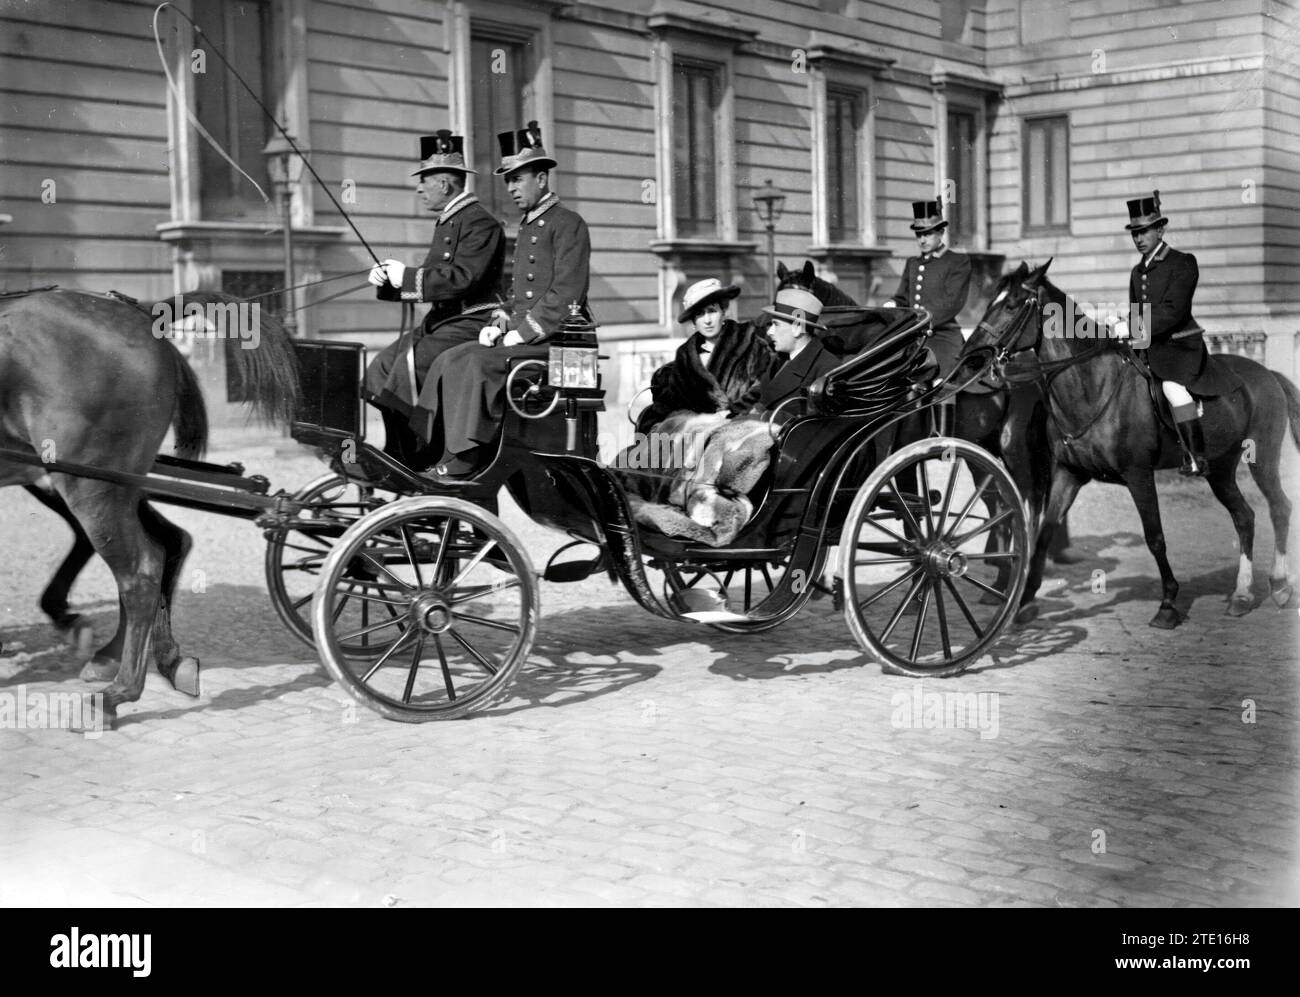 01/25/1916. Prince of Wattemberg in Madrid. Her Majesty Queen Victoria Eugenia, with her brother, Prince Leopold of Wattemberg, upon returning to the palace yesterday morning. Credit: Album / Archivo ABC / José Zegri Stock Photo